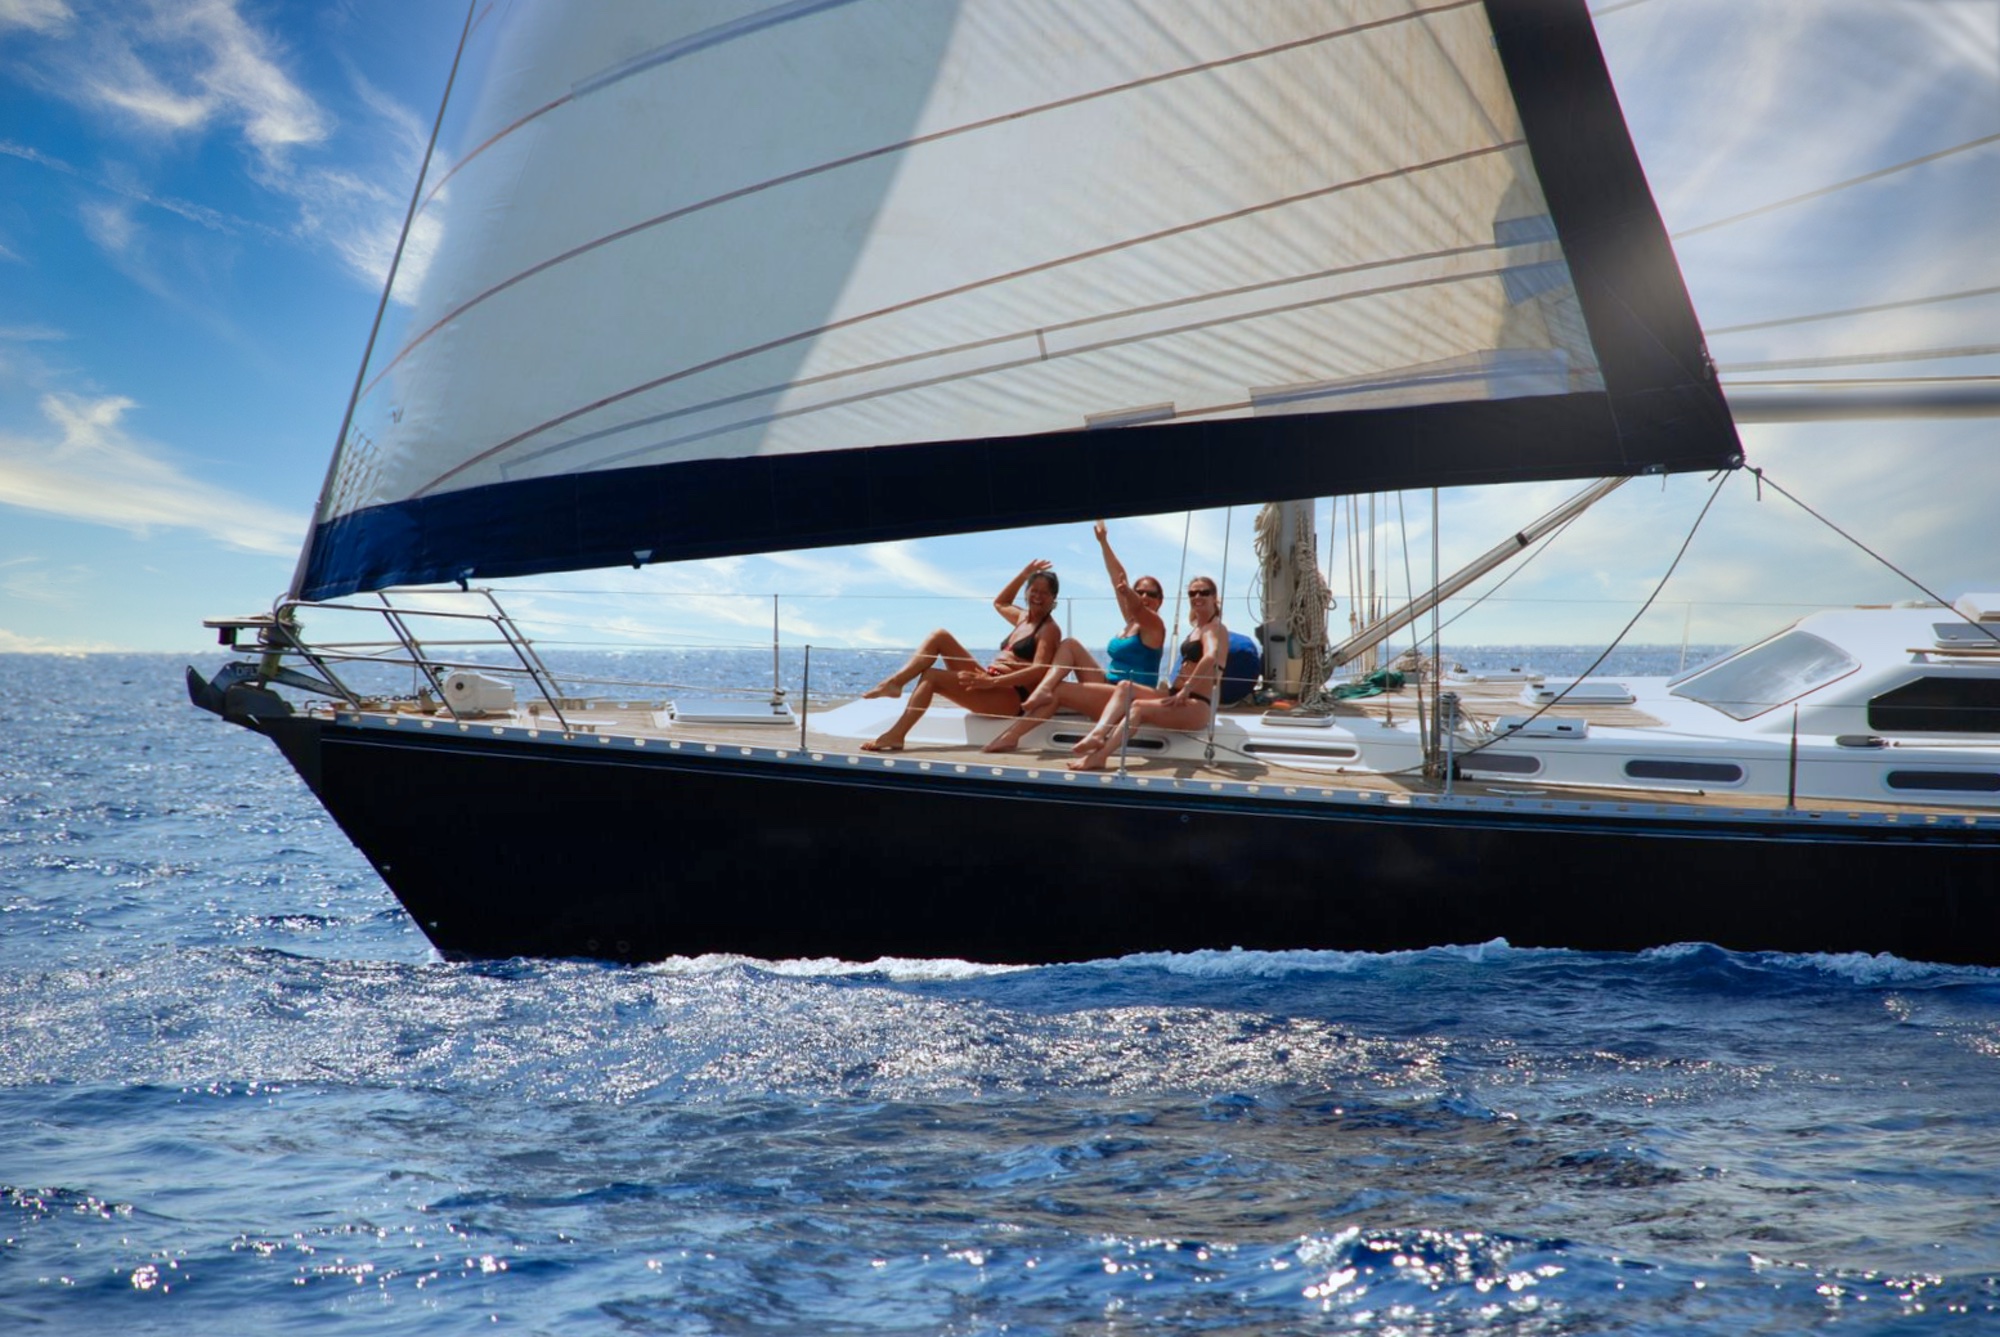 Our 55' yacht Artemis, based in the Dodecanese islands of Greece